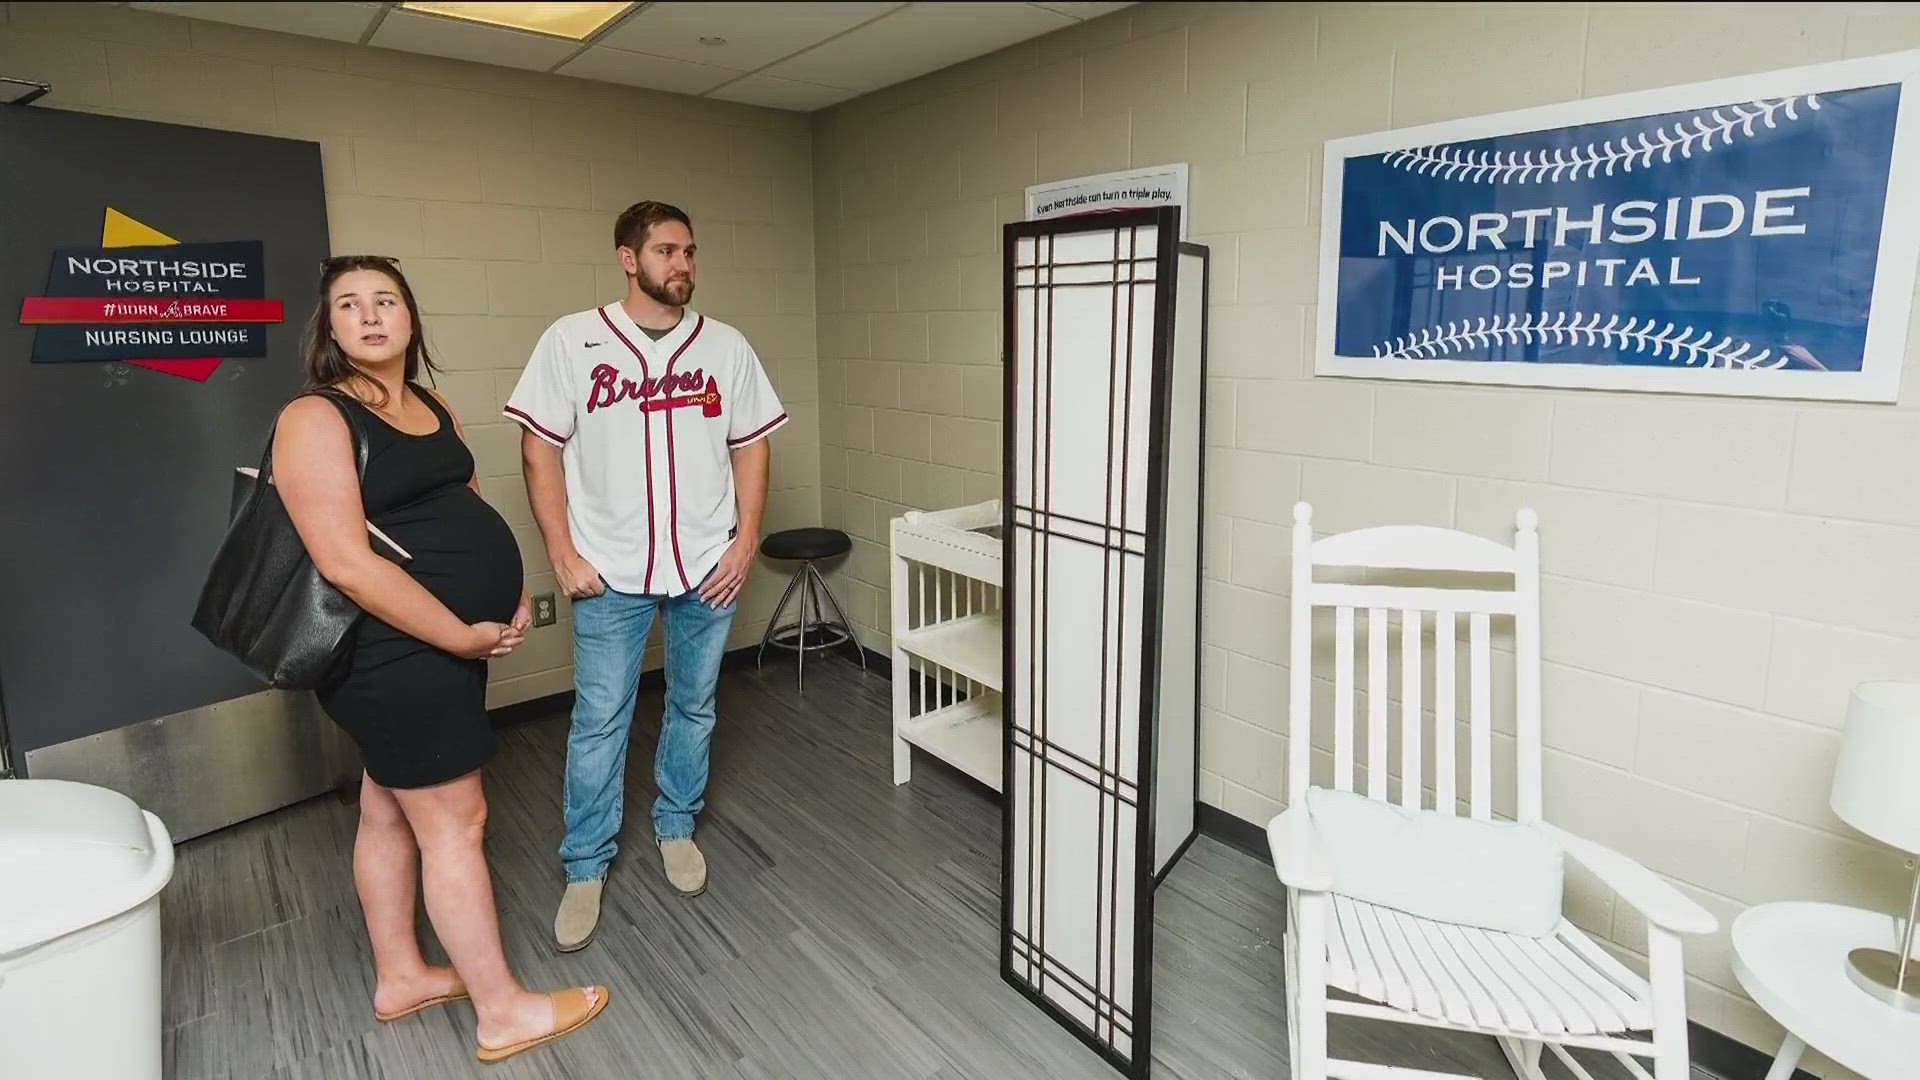 Enhancing the fan experience at Truist Park, Atlanta Braves and Northside Hospital unveil a new nursing lounge for moms and babies.